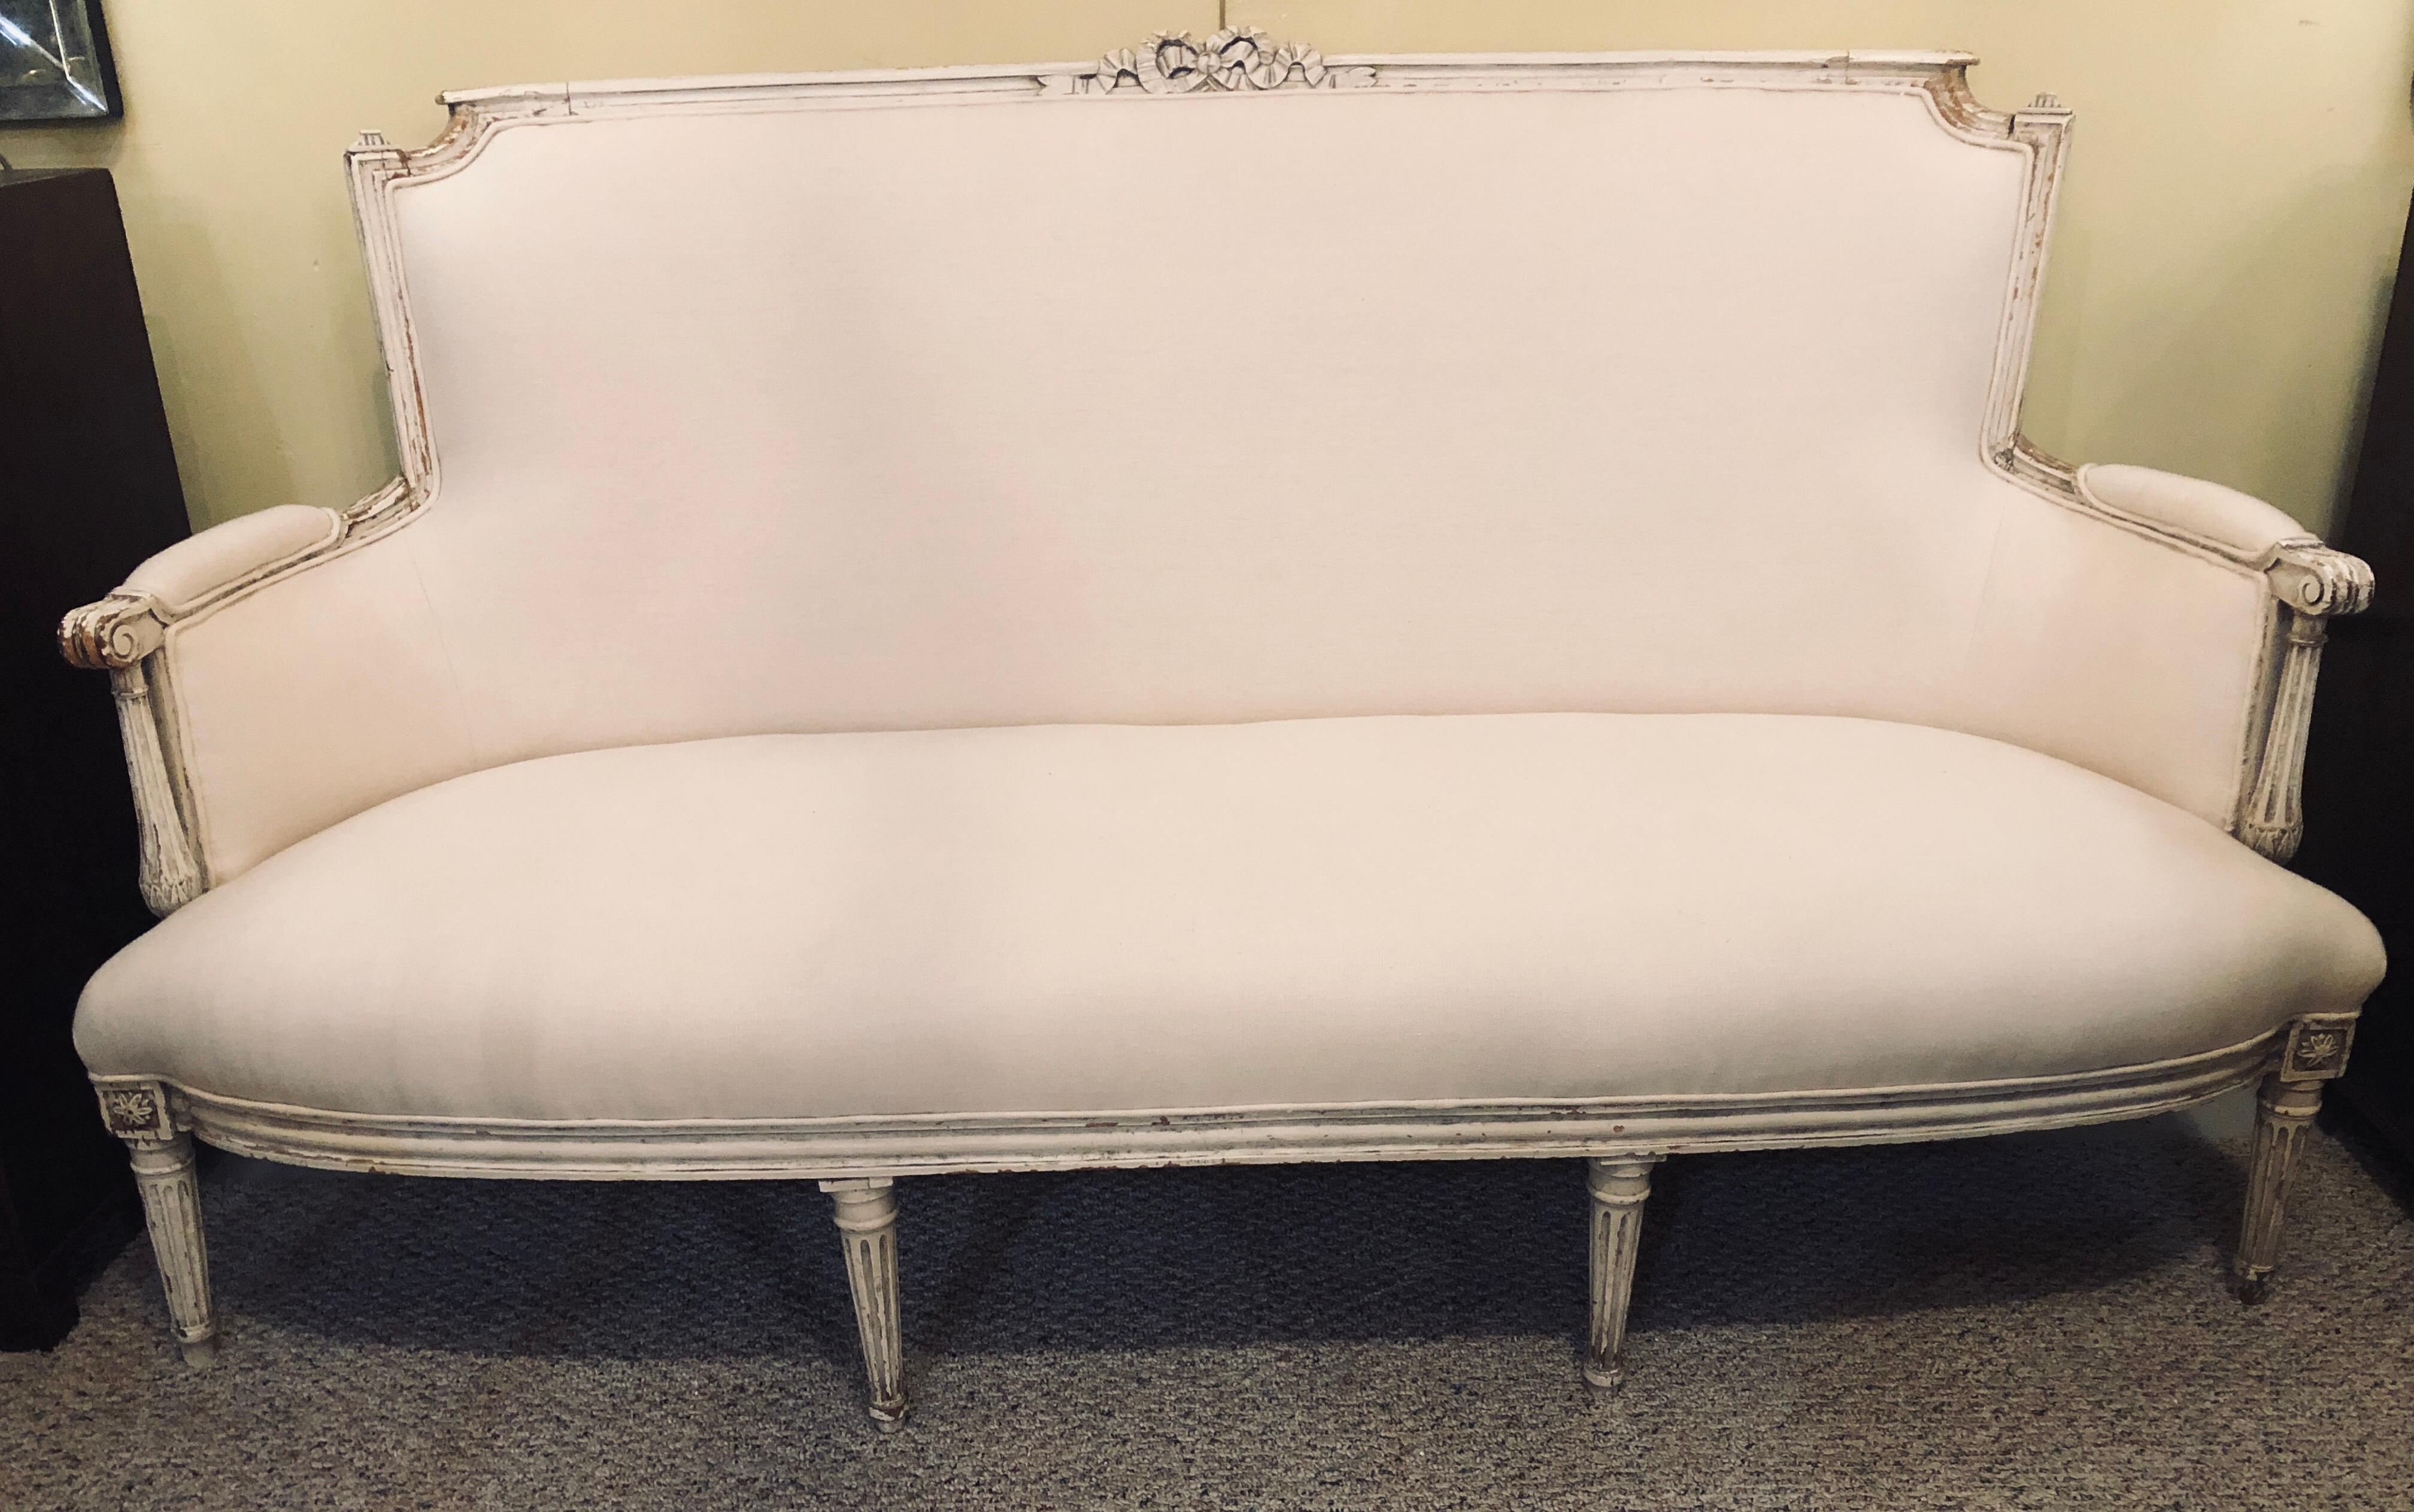 A late 19th or early 20th century distressed white paint decorated Louis XVI style Swedish canopy or small sofa. This finely original paint decorated sofa is slightly longer than a settee yet not really large enough to be a full sofa. The original